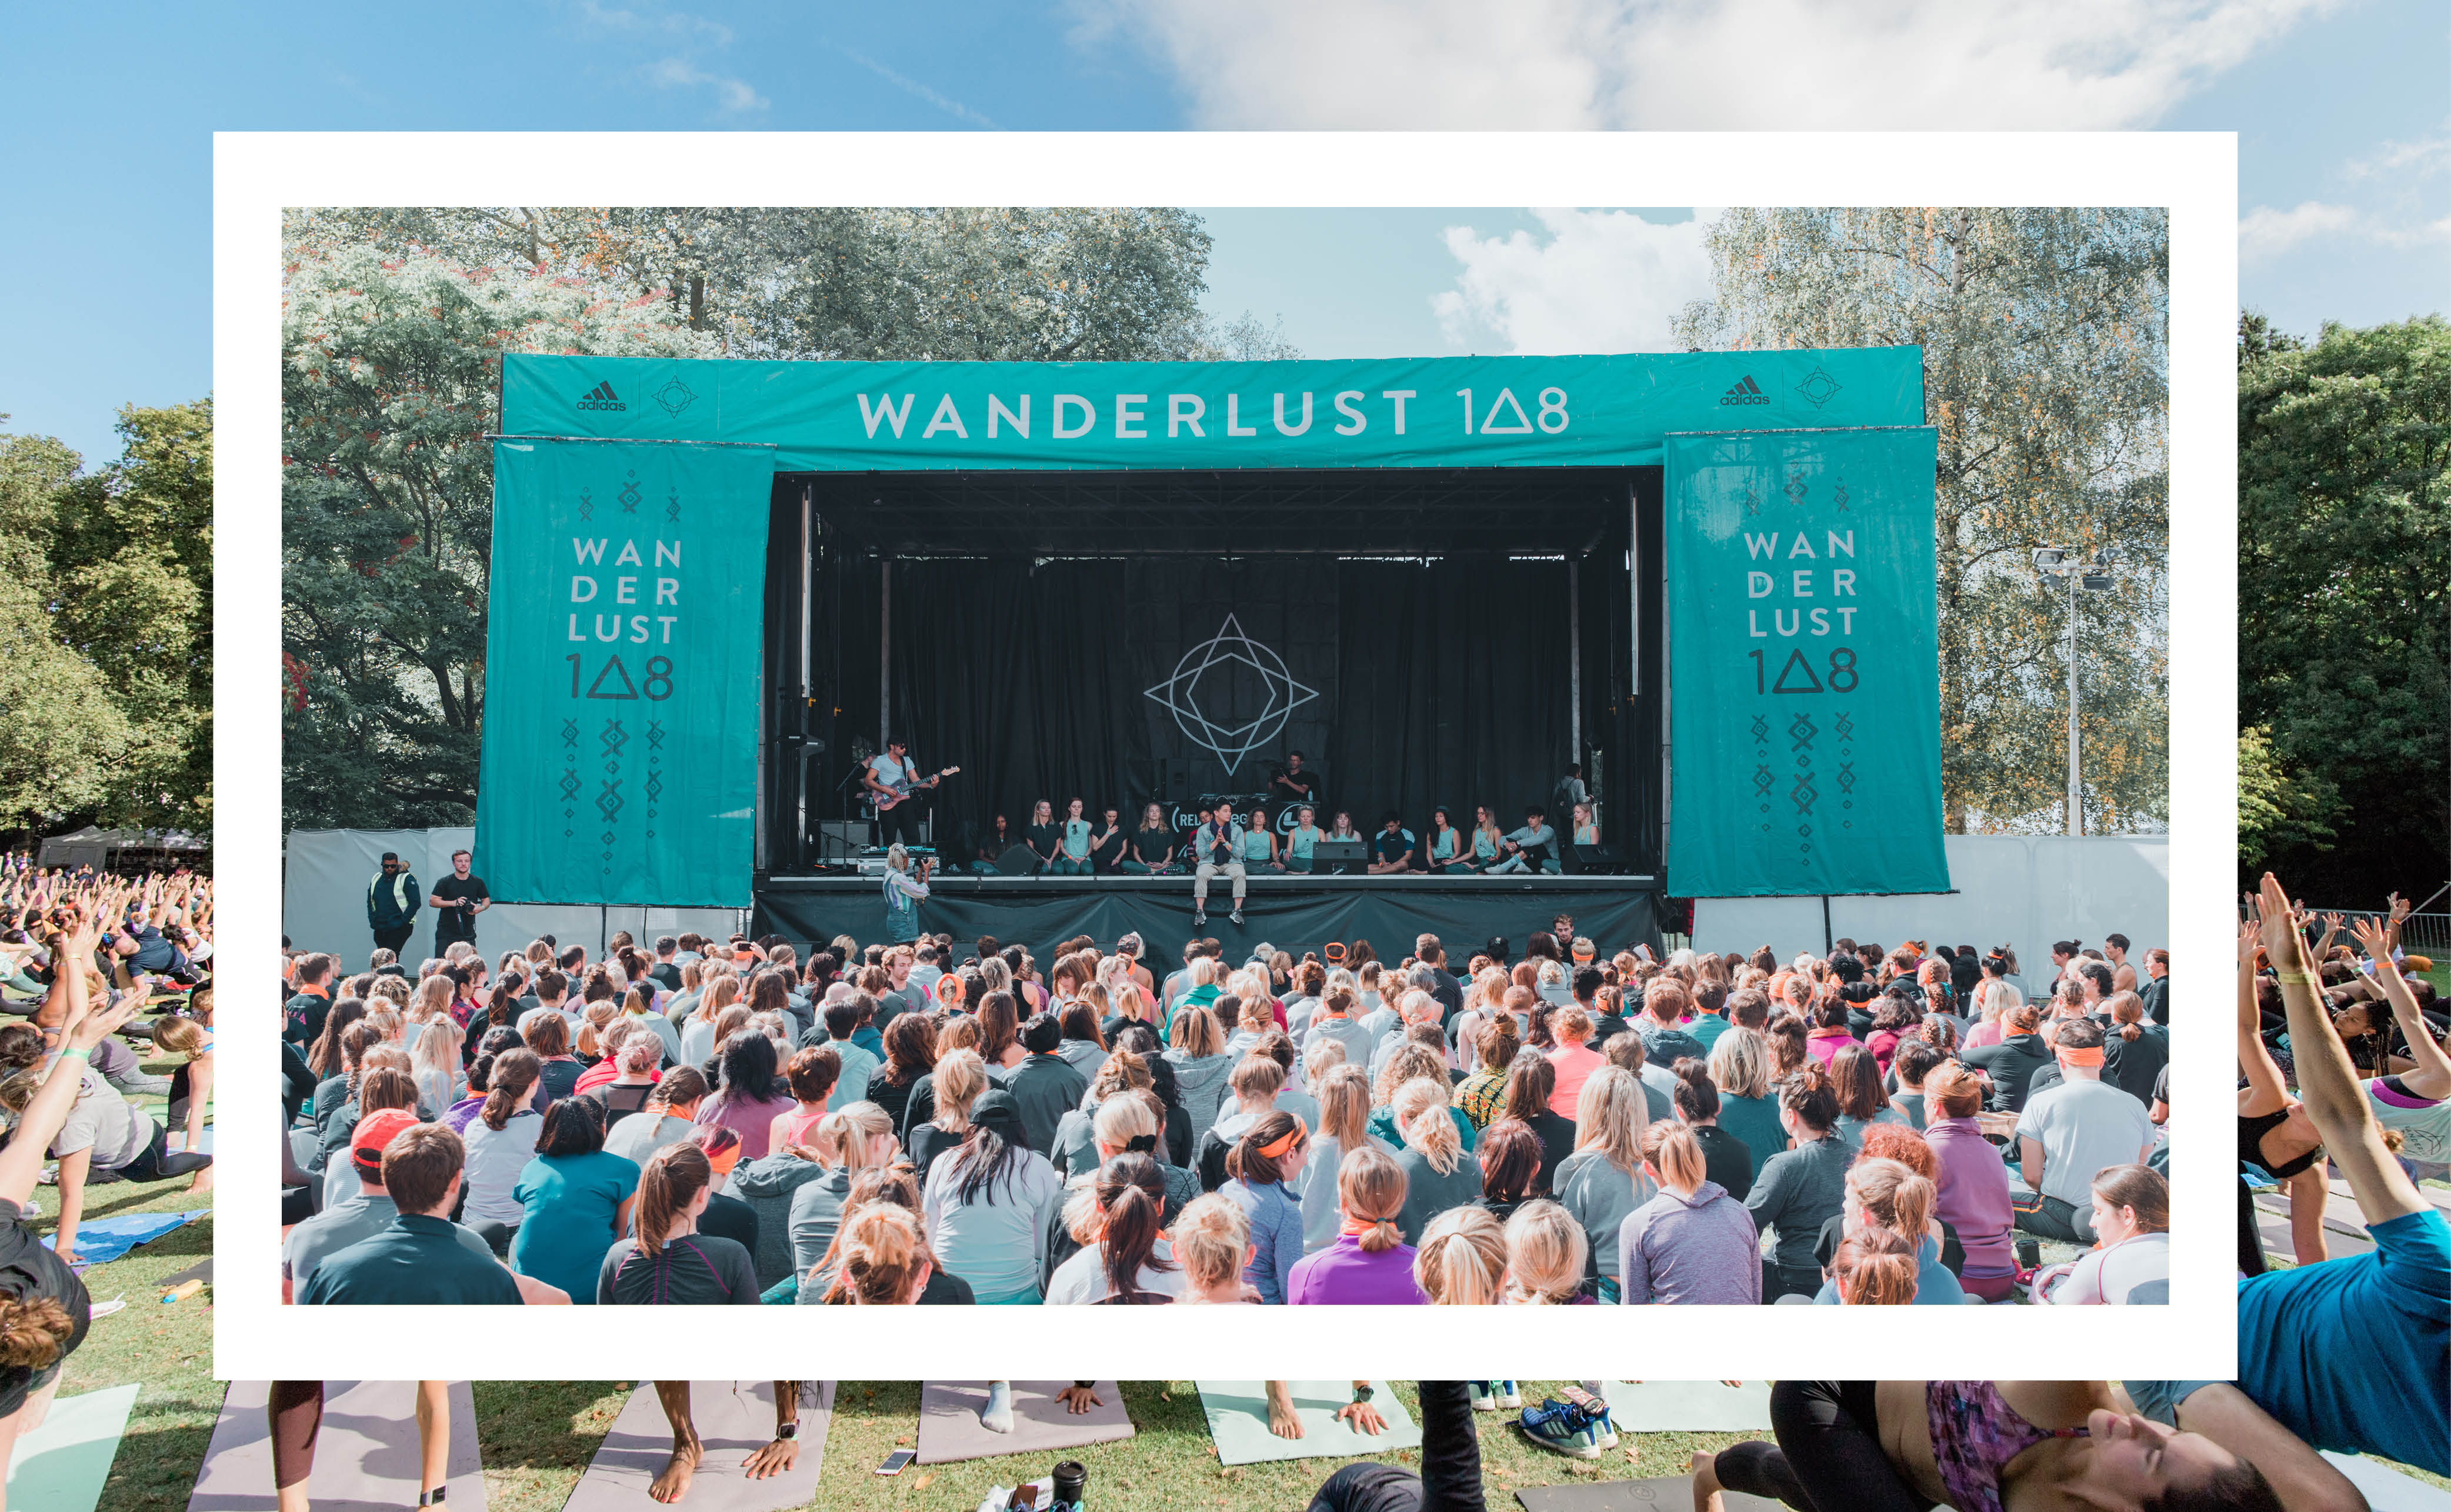 Join us at Wanderlust Festival and immerse yourself in the inspiring ideas of thought-leaders